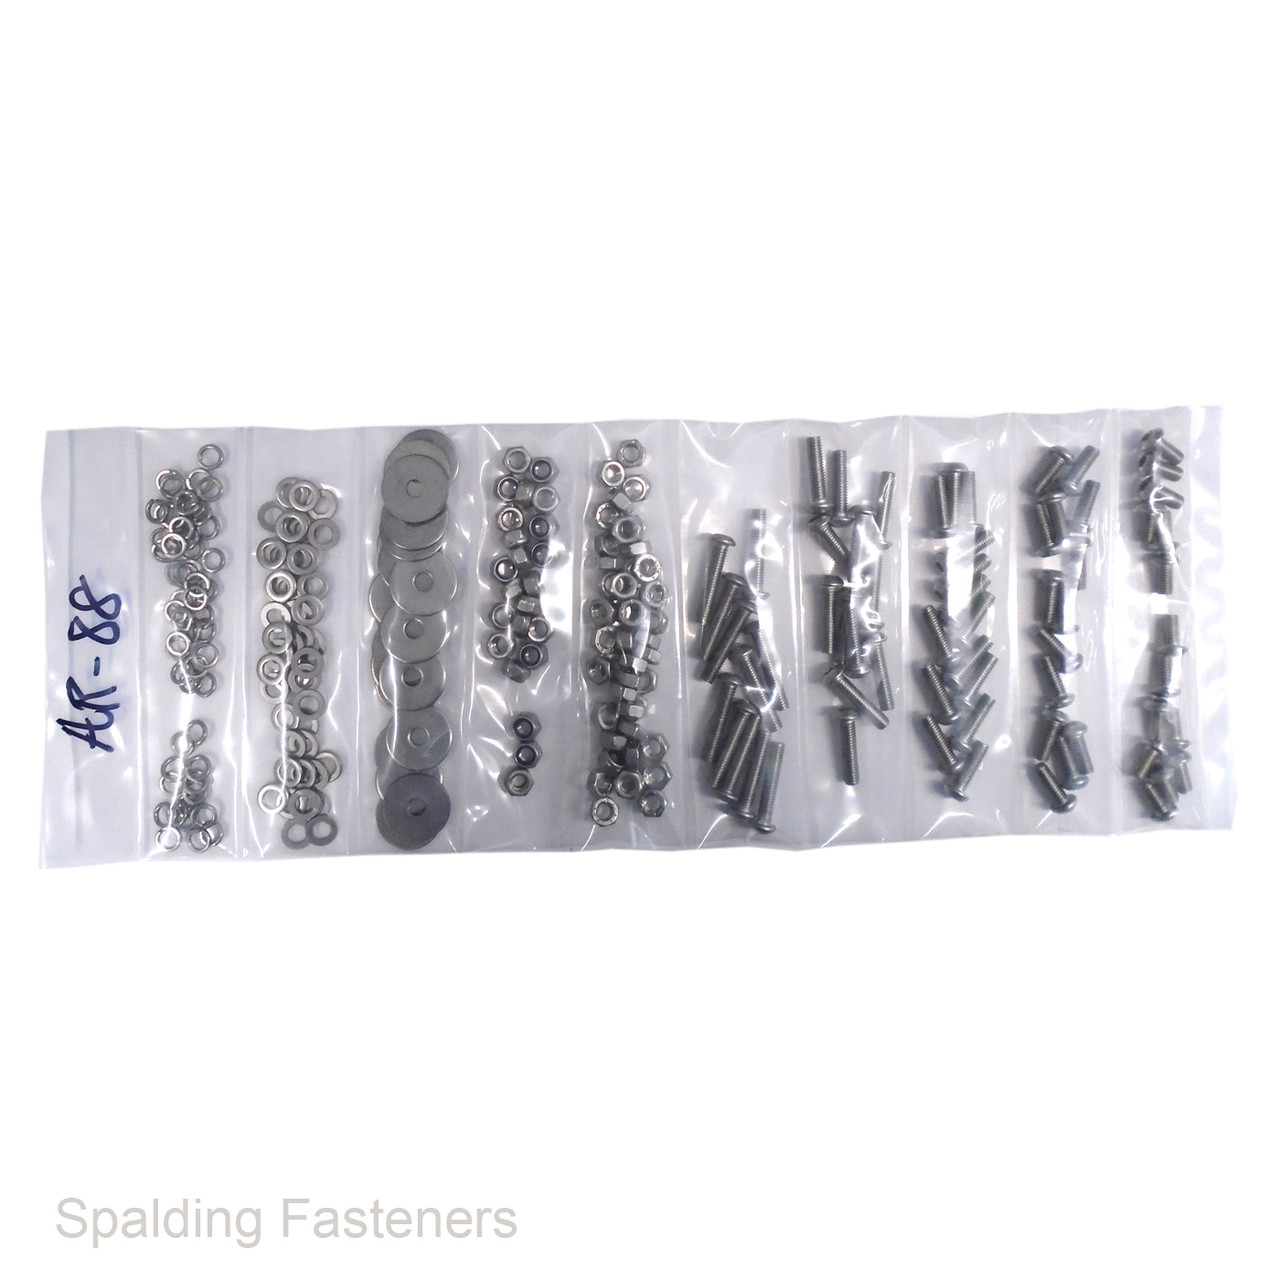 Assorted M6 Stainless Steel Socket Button Screws, Nuts & Washers